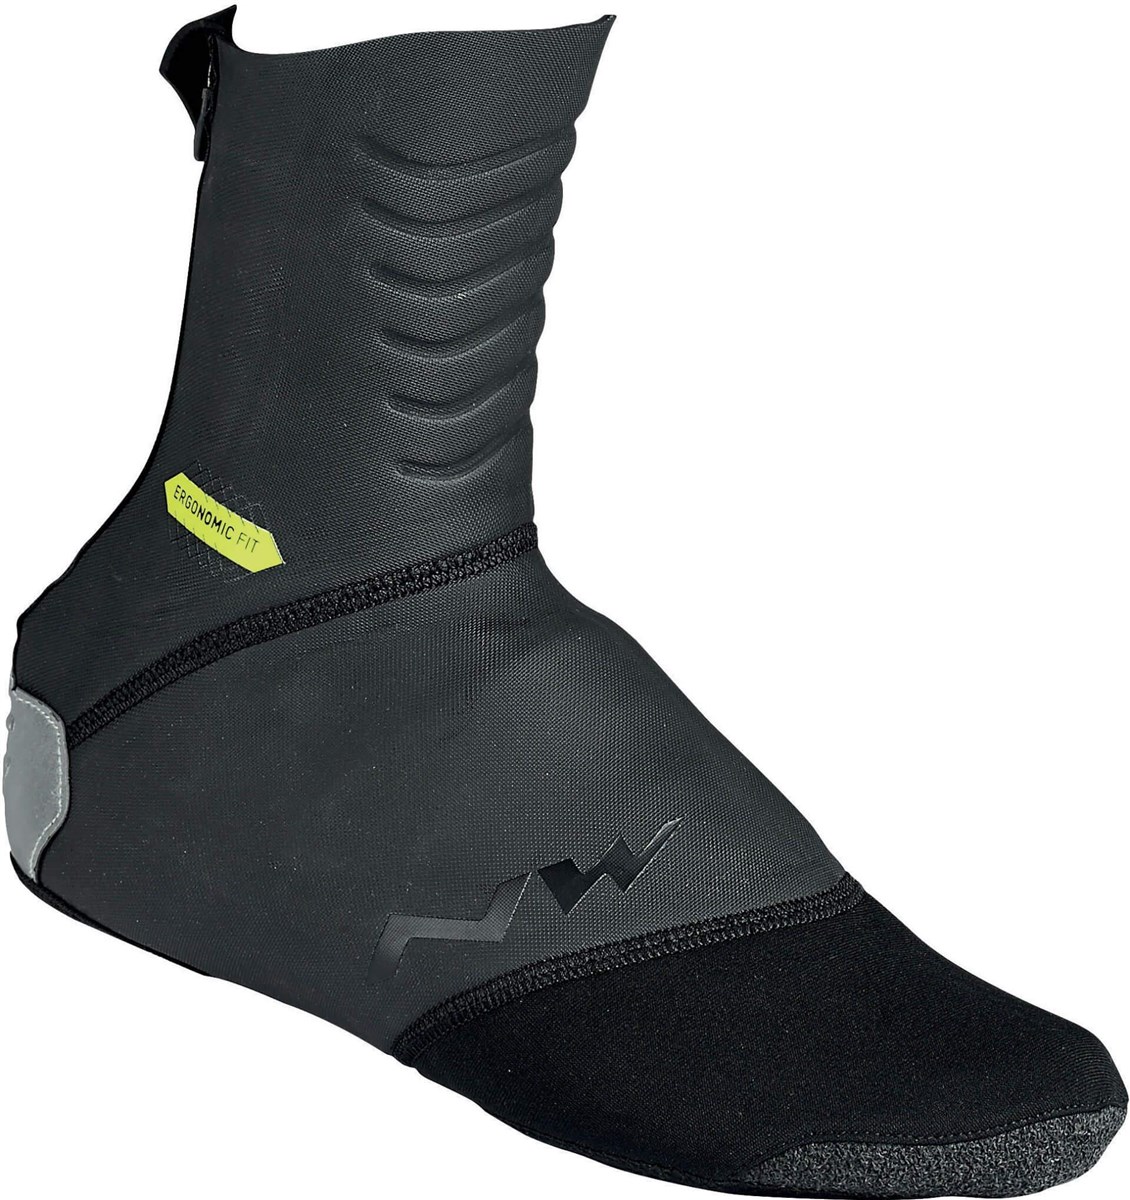 Northwave Storm Shoecovers product image